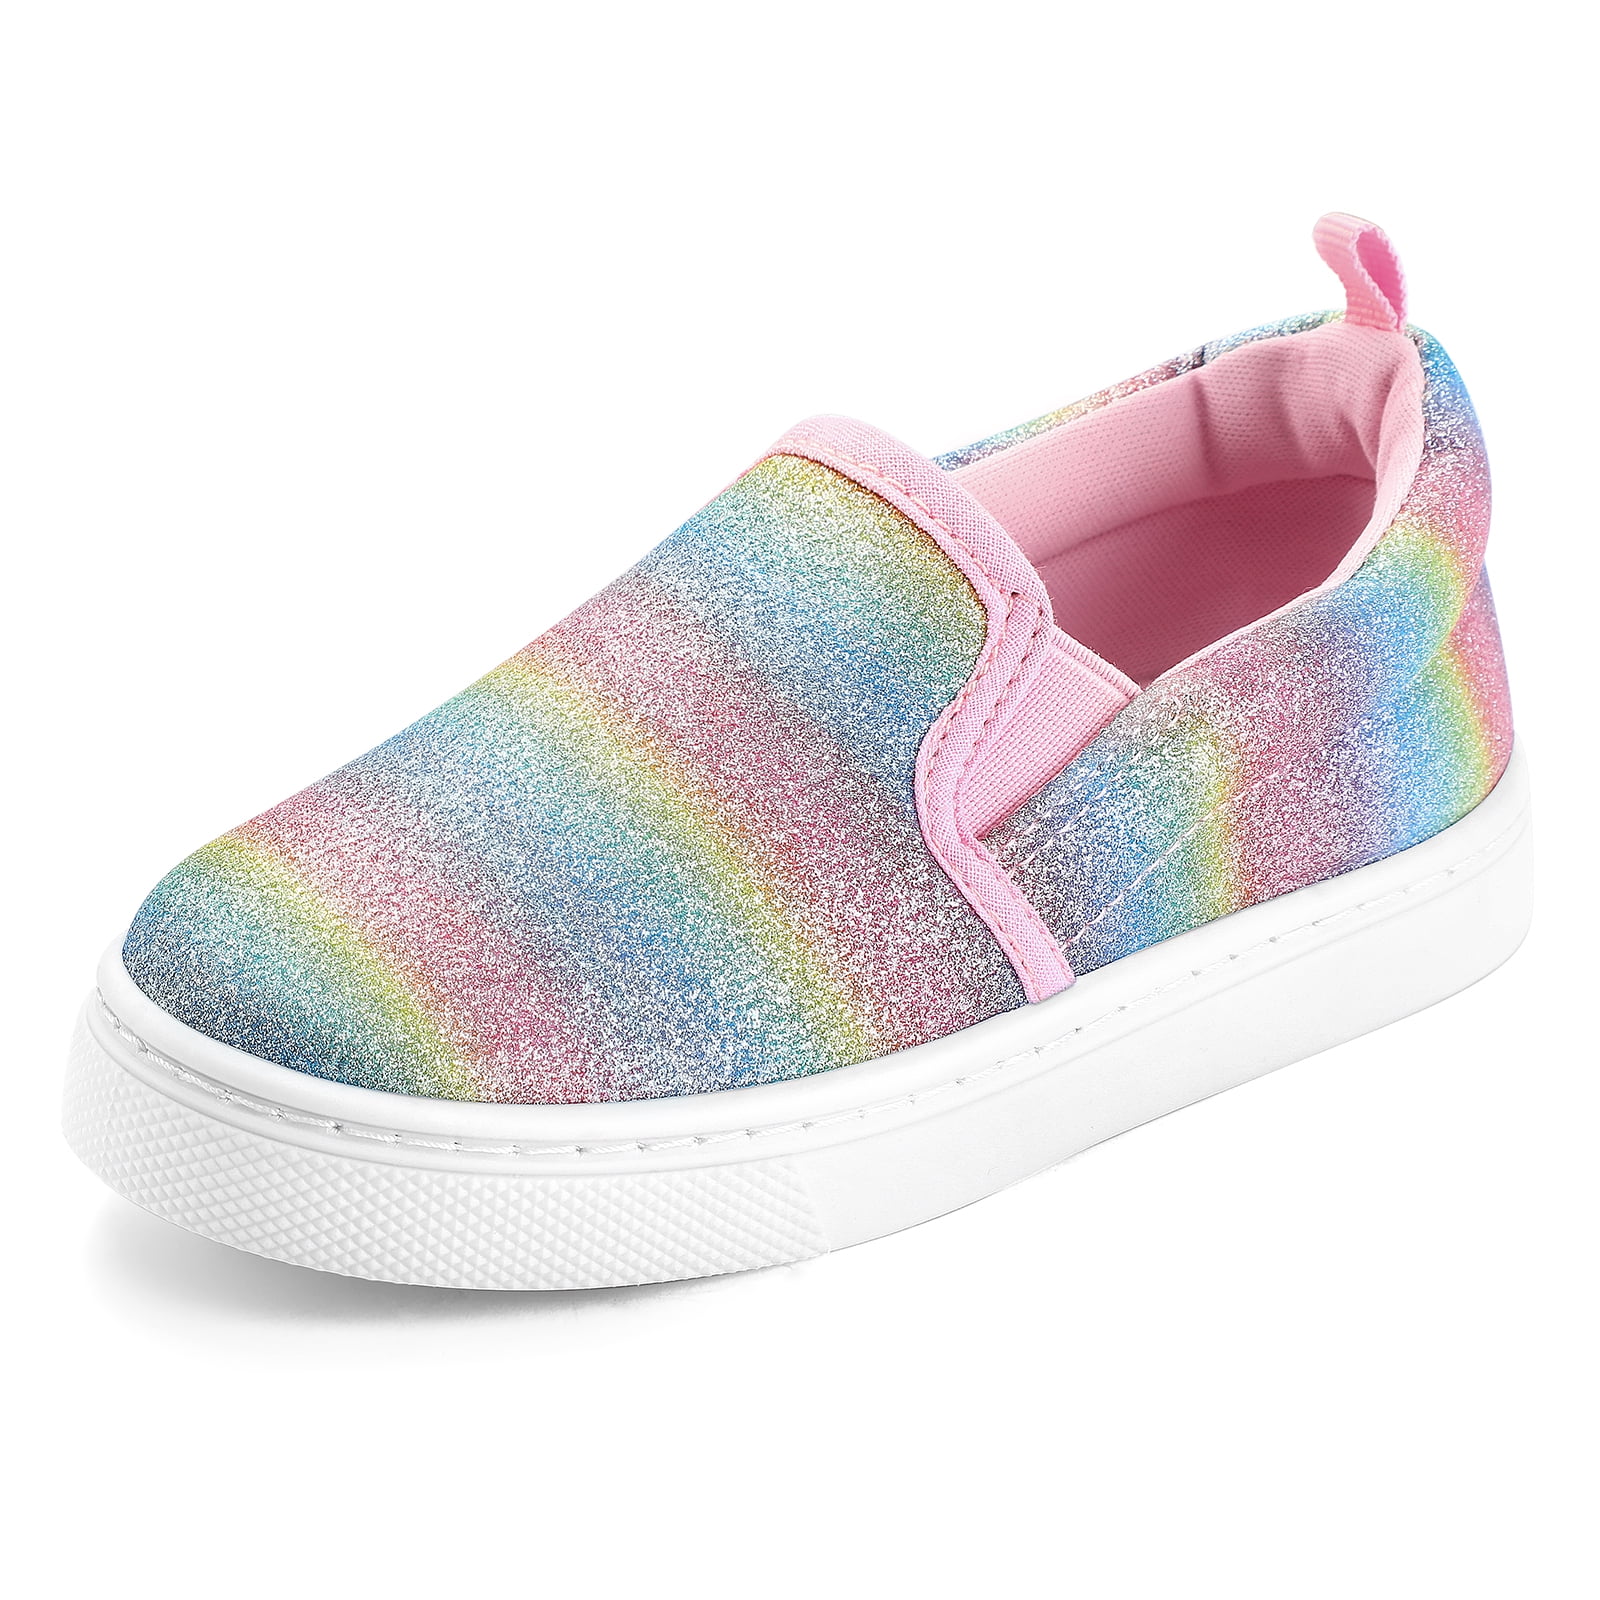 BOCCA Toddler Girls Colorful Slip on Kids Canvas Walking Shoes Size 3 ...